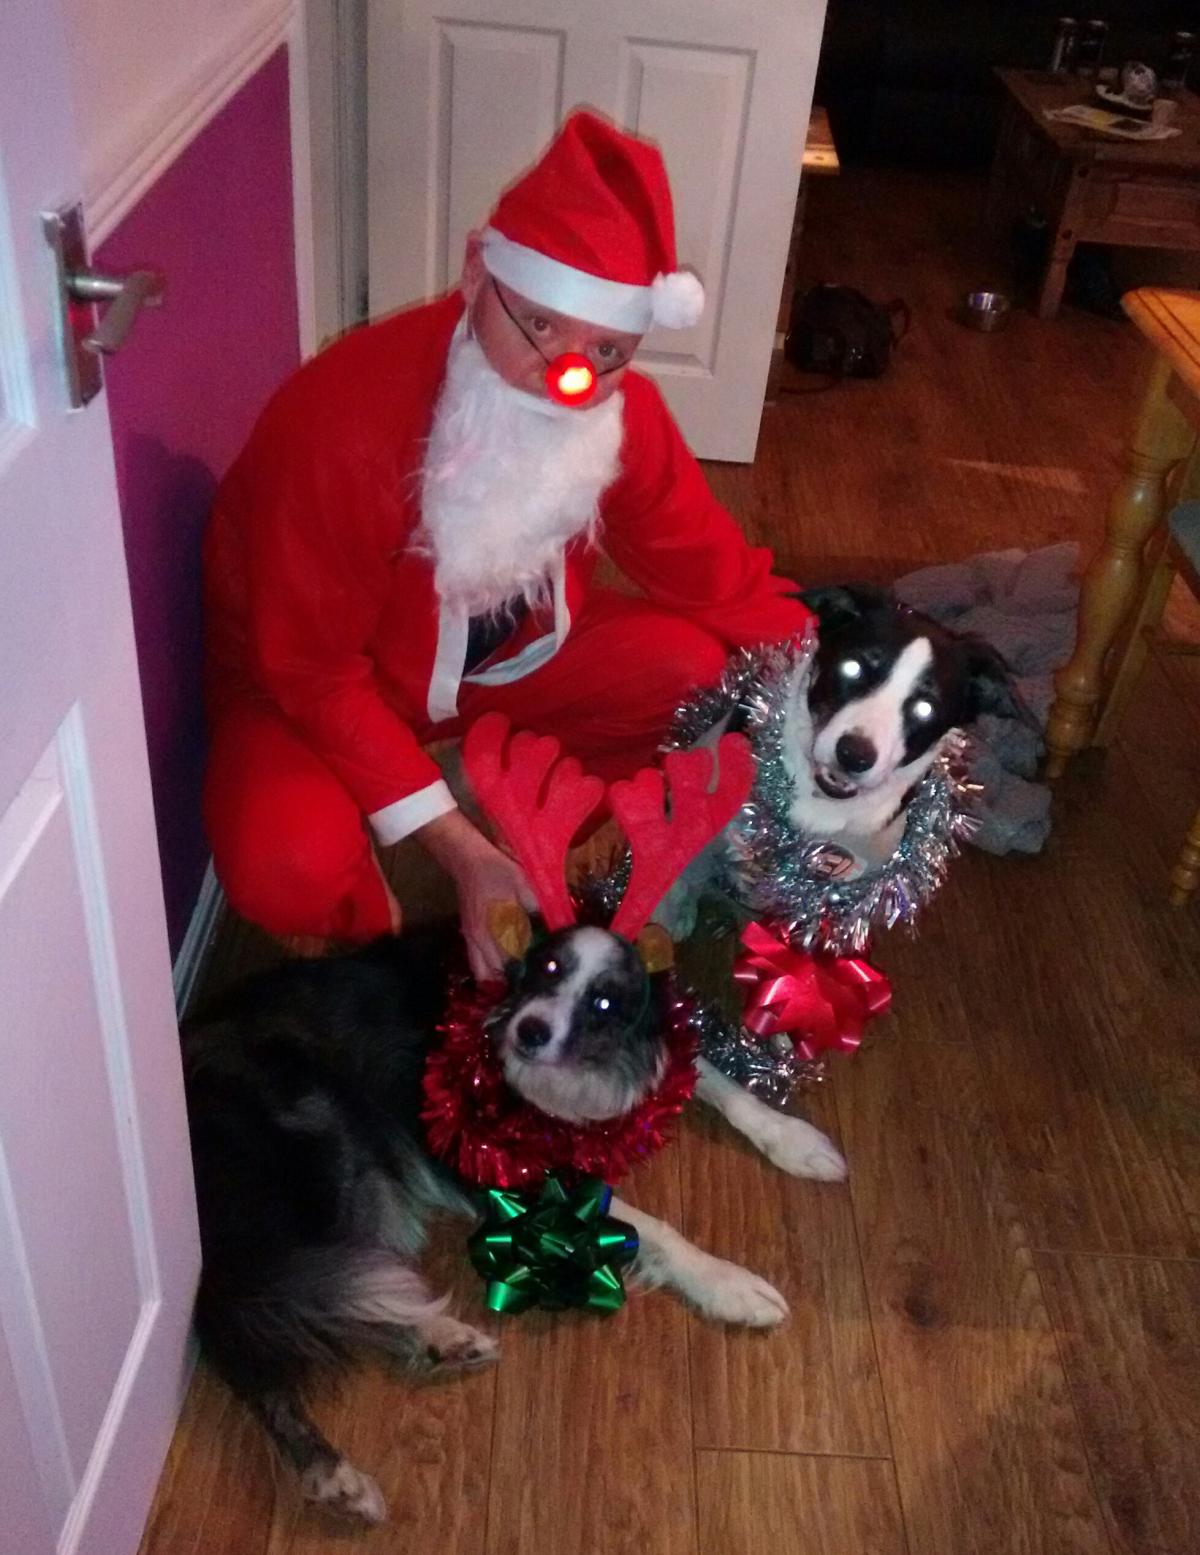 Annette, from Shildon, sent in this picture of her two dogs, Holly, 9, and Jack, 7